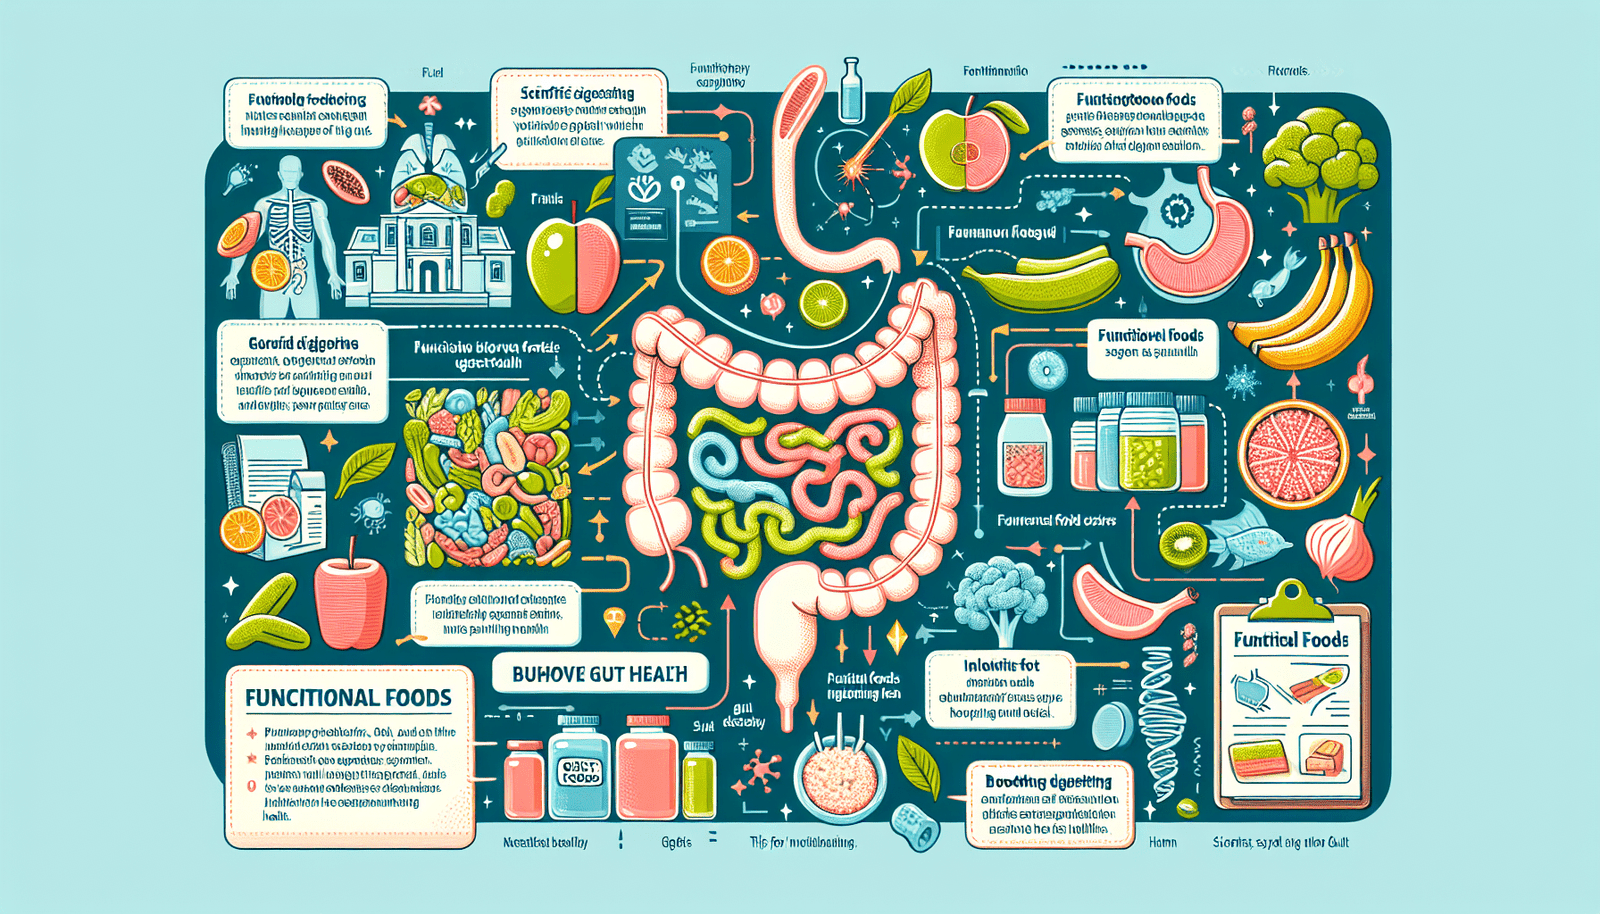 Can Functional Foods Improve Gut Health And How?